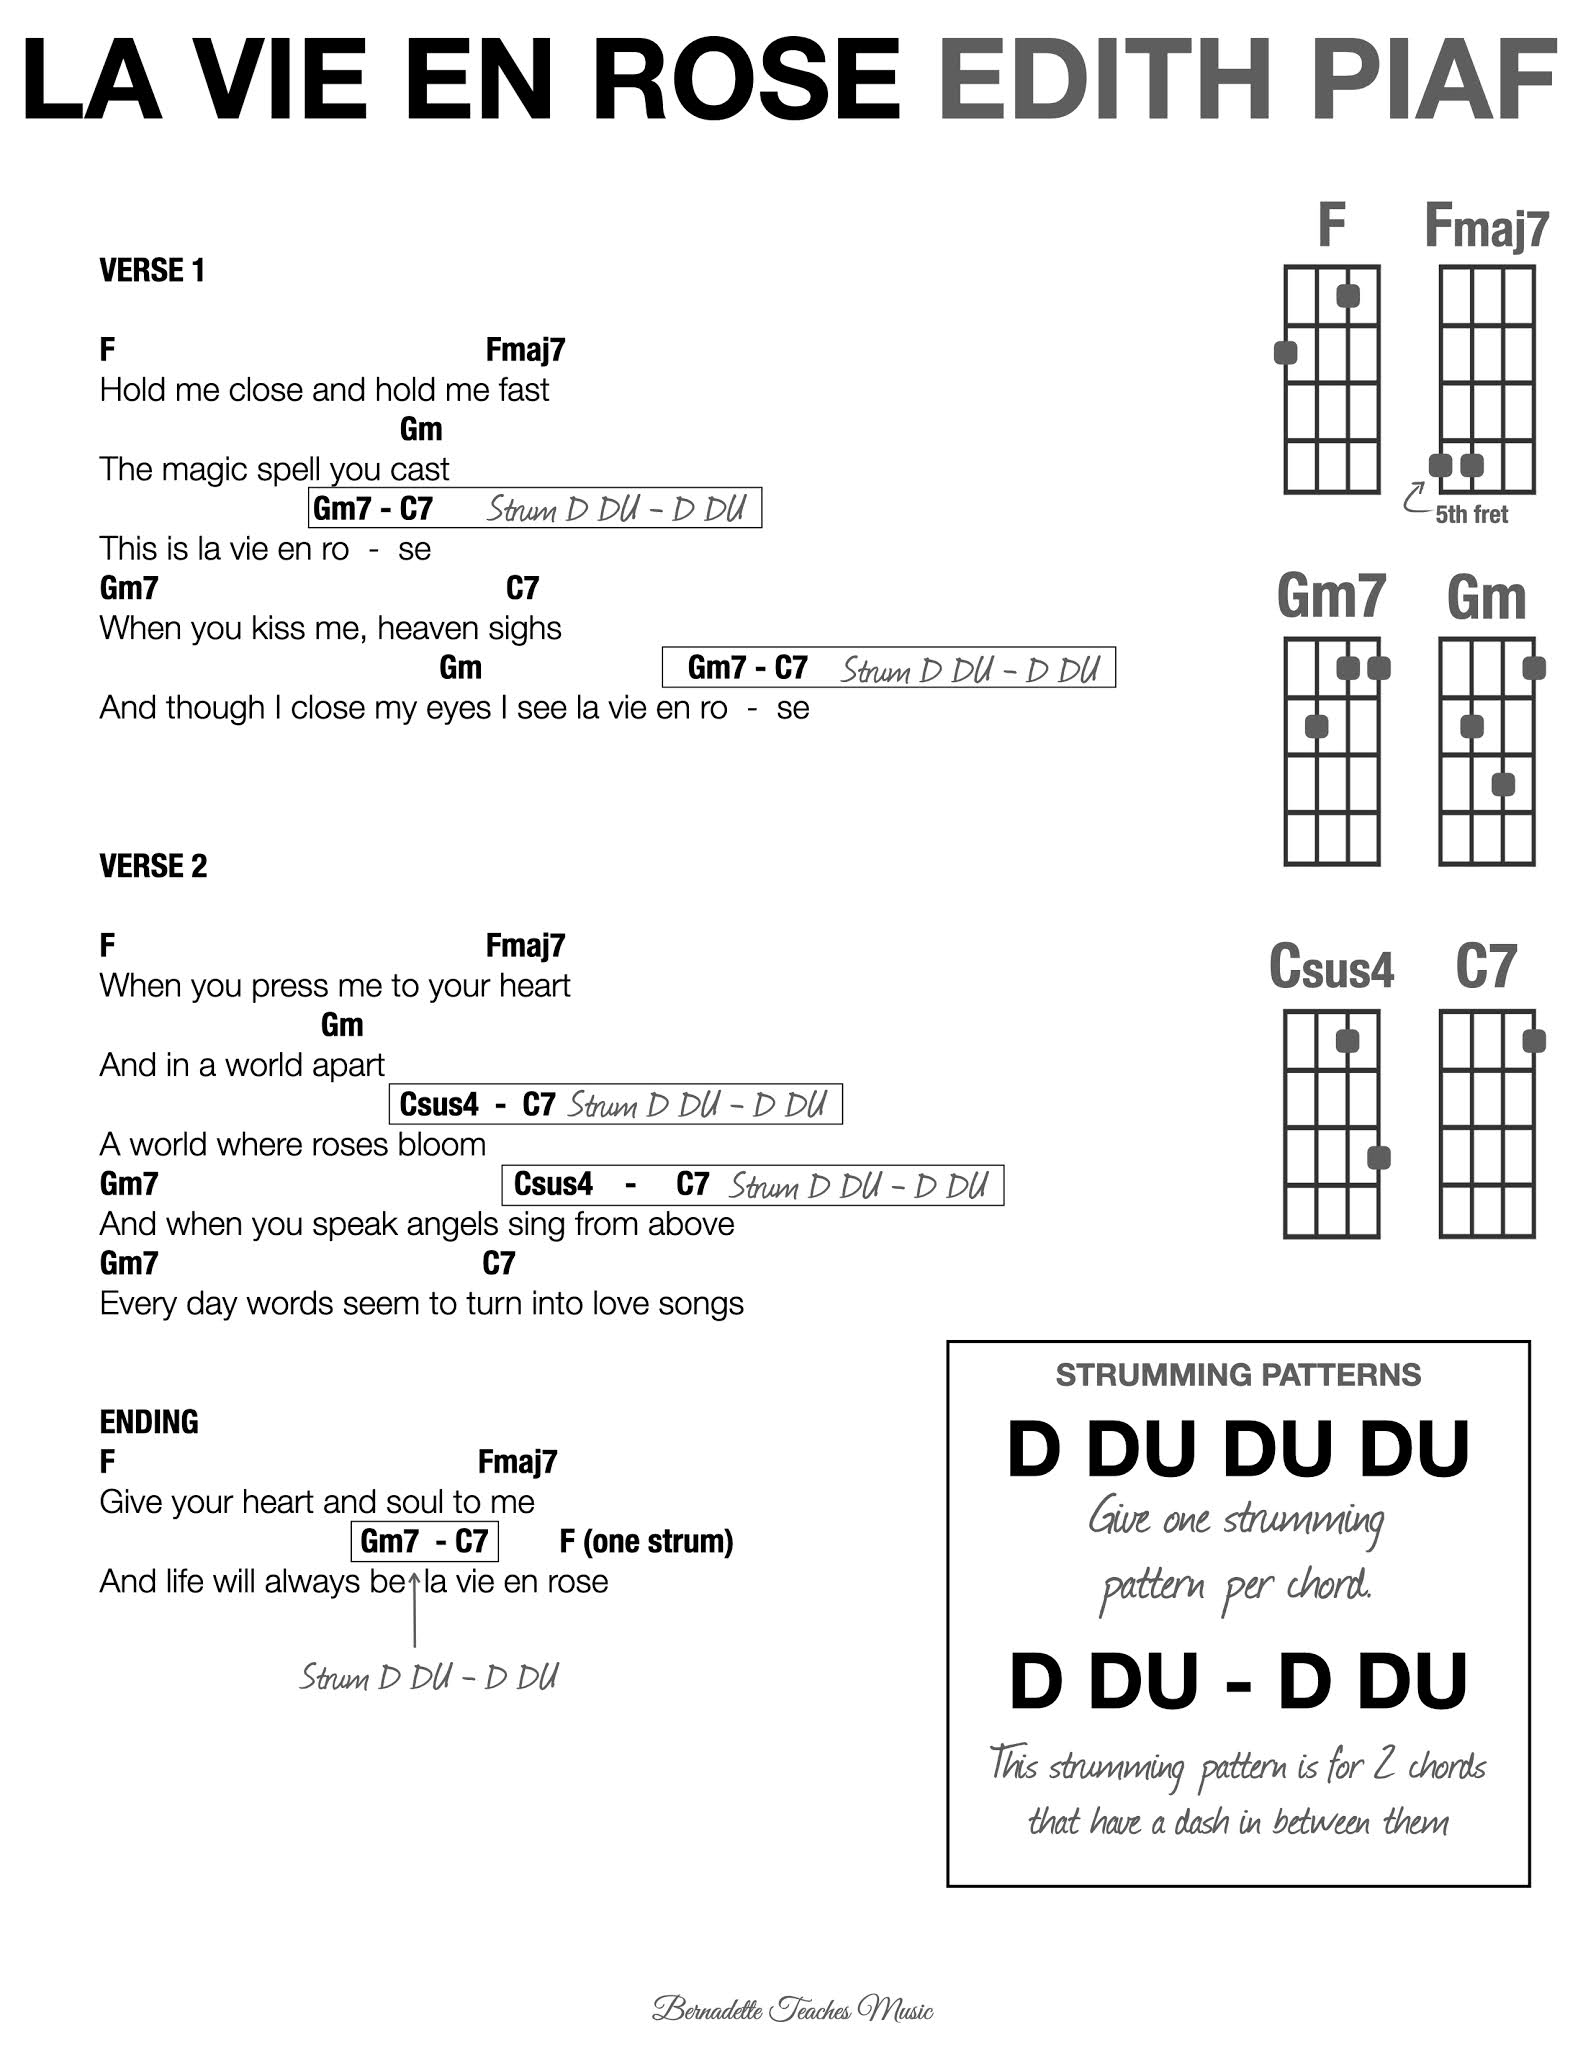 The 3rd Annual 30dayukesongchallenge Begins Bernadette Teaches Music 119 best images about ukulele on these pictures of this page are about:lava song ukulele chords. bernadette teaches music